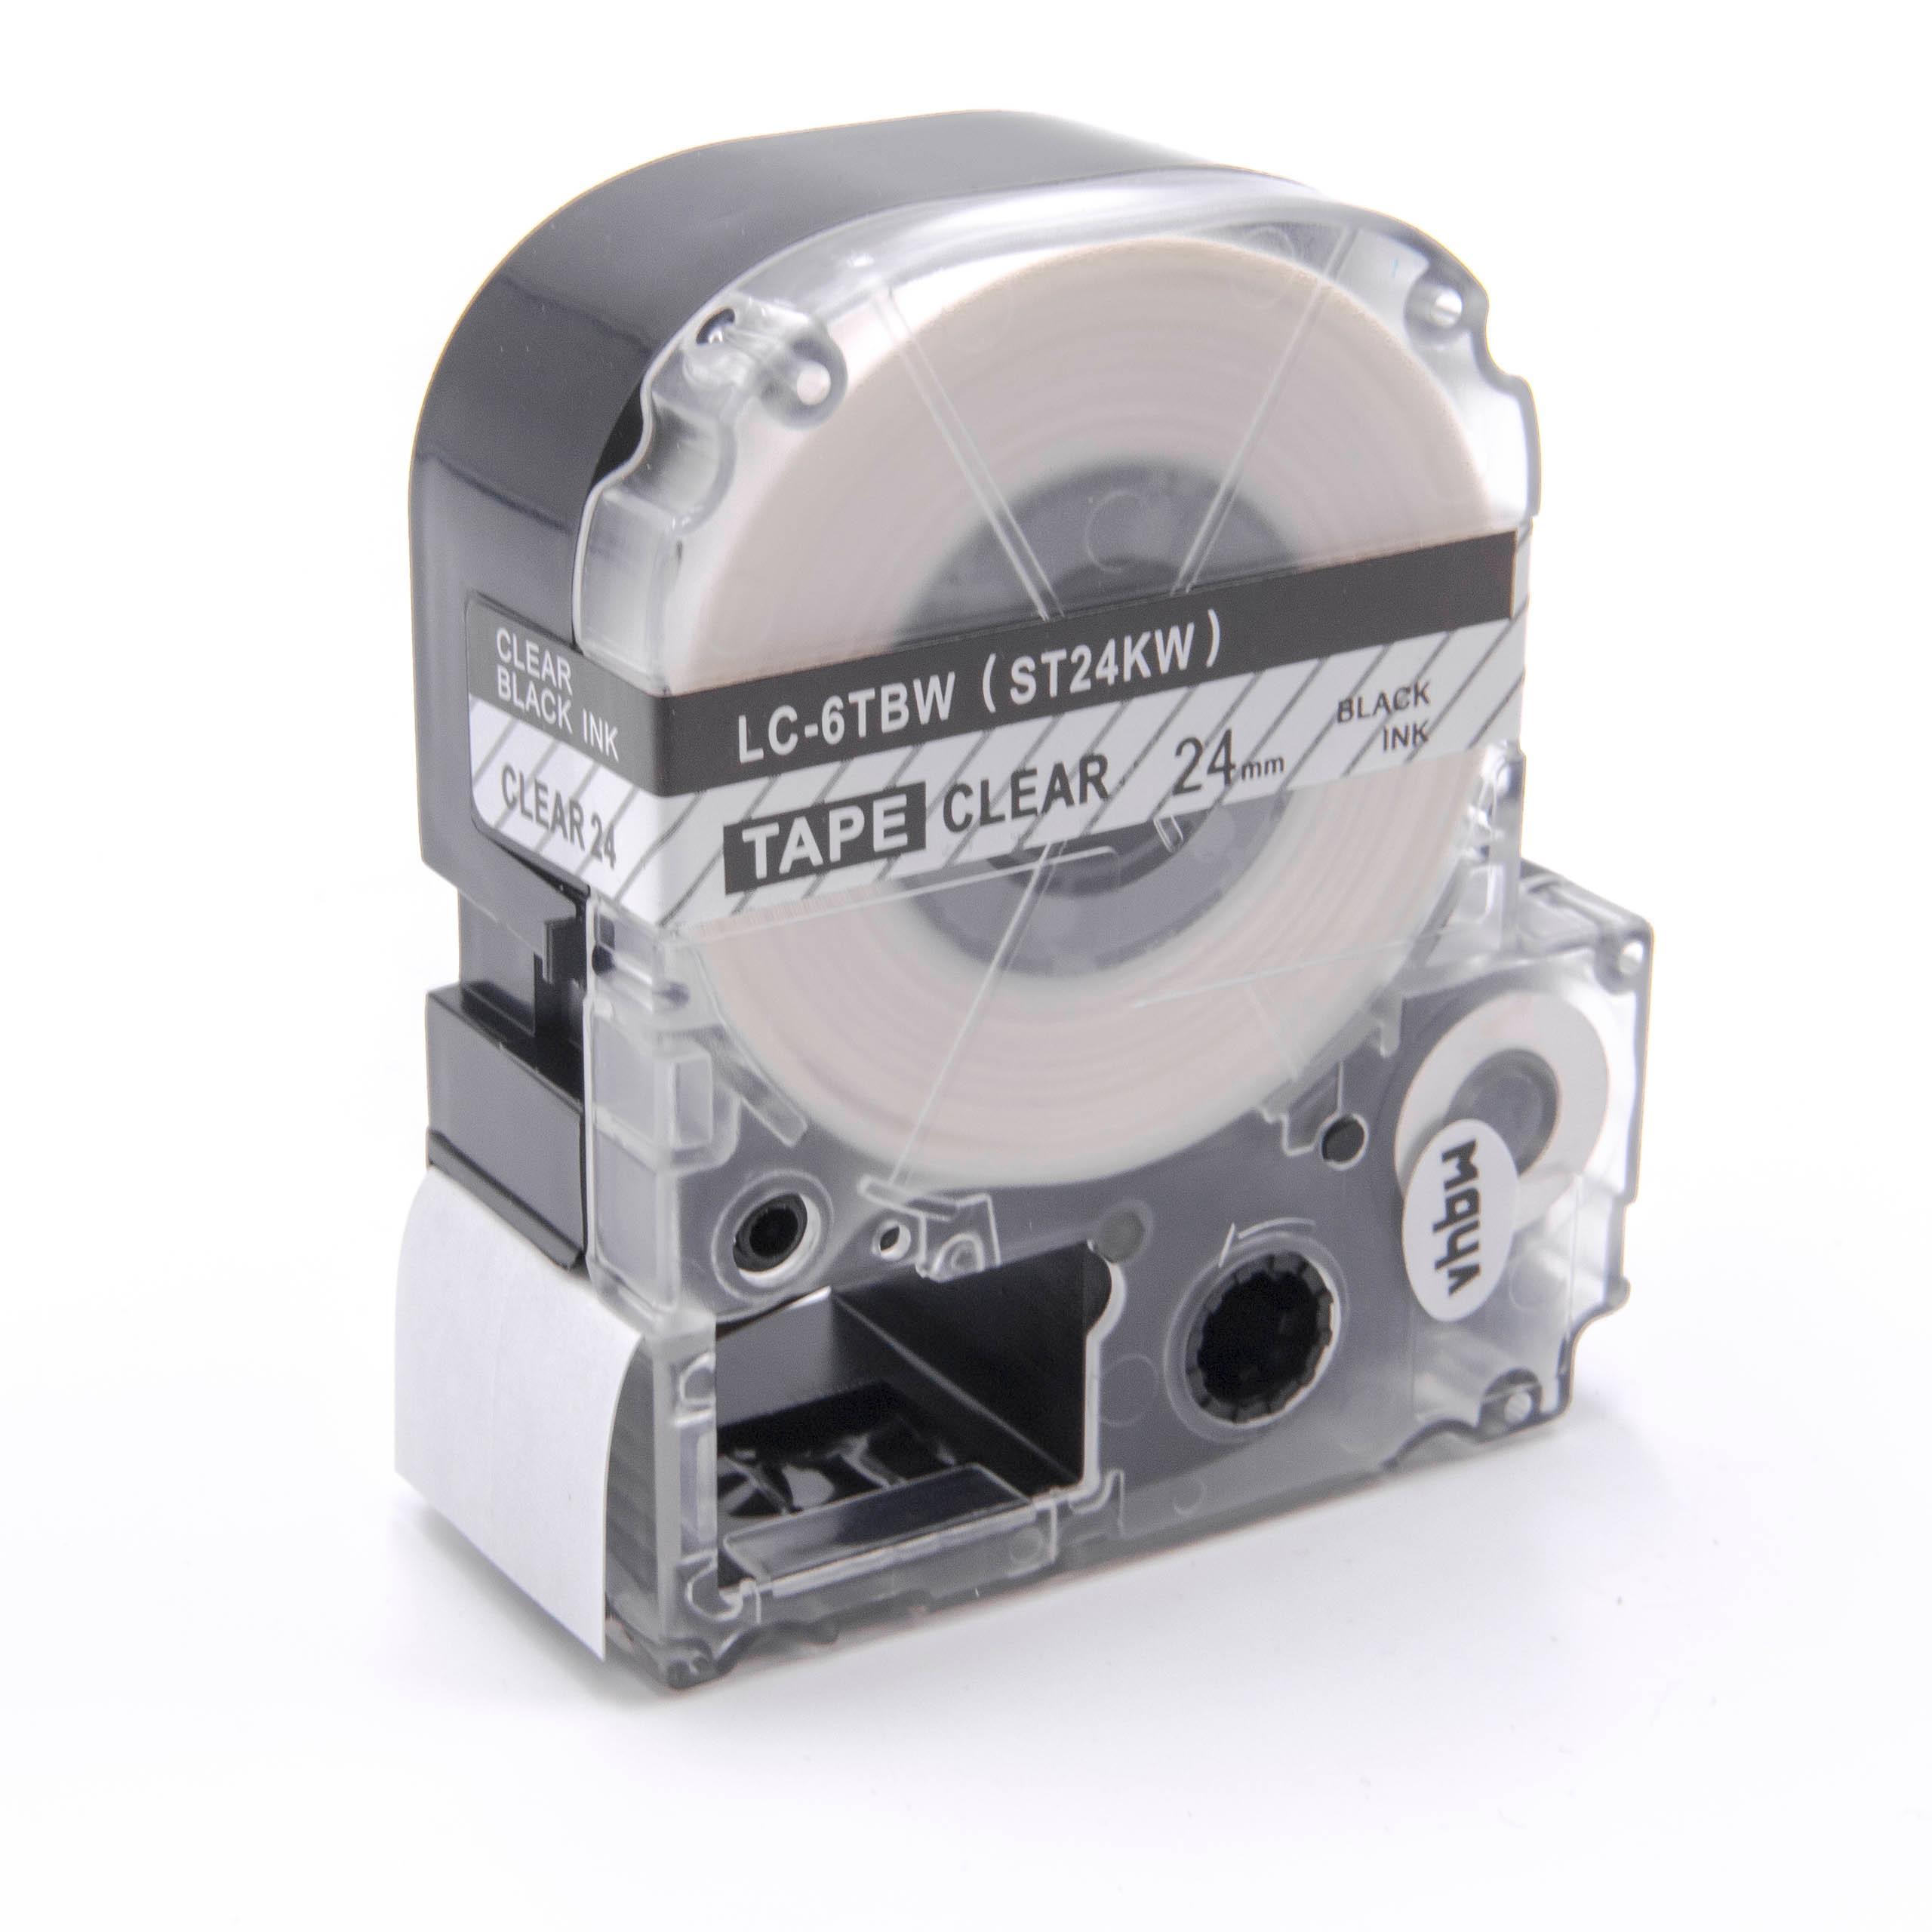 Label Tape as Replacement for Epson LC-6TBW - 24 mm Black to Transparent